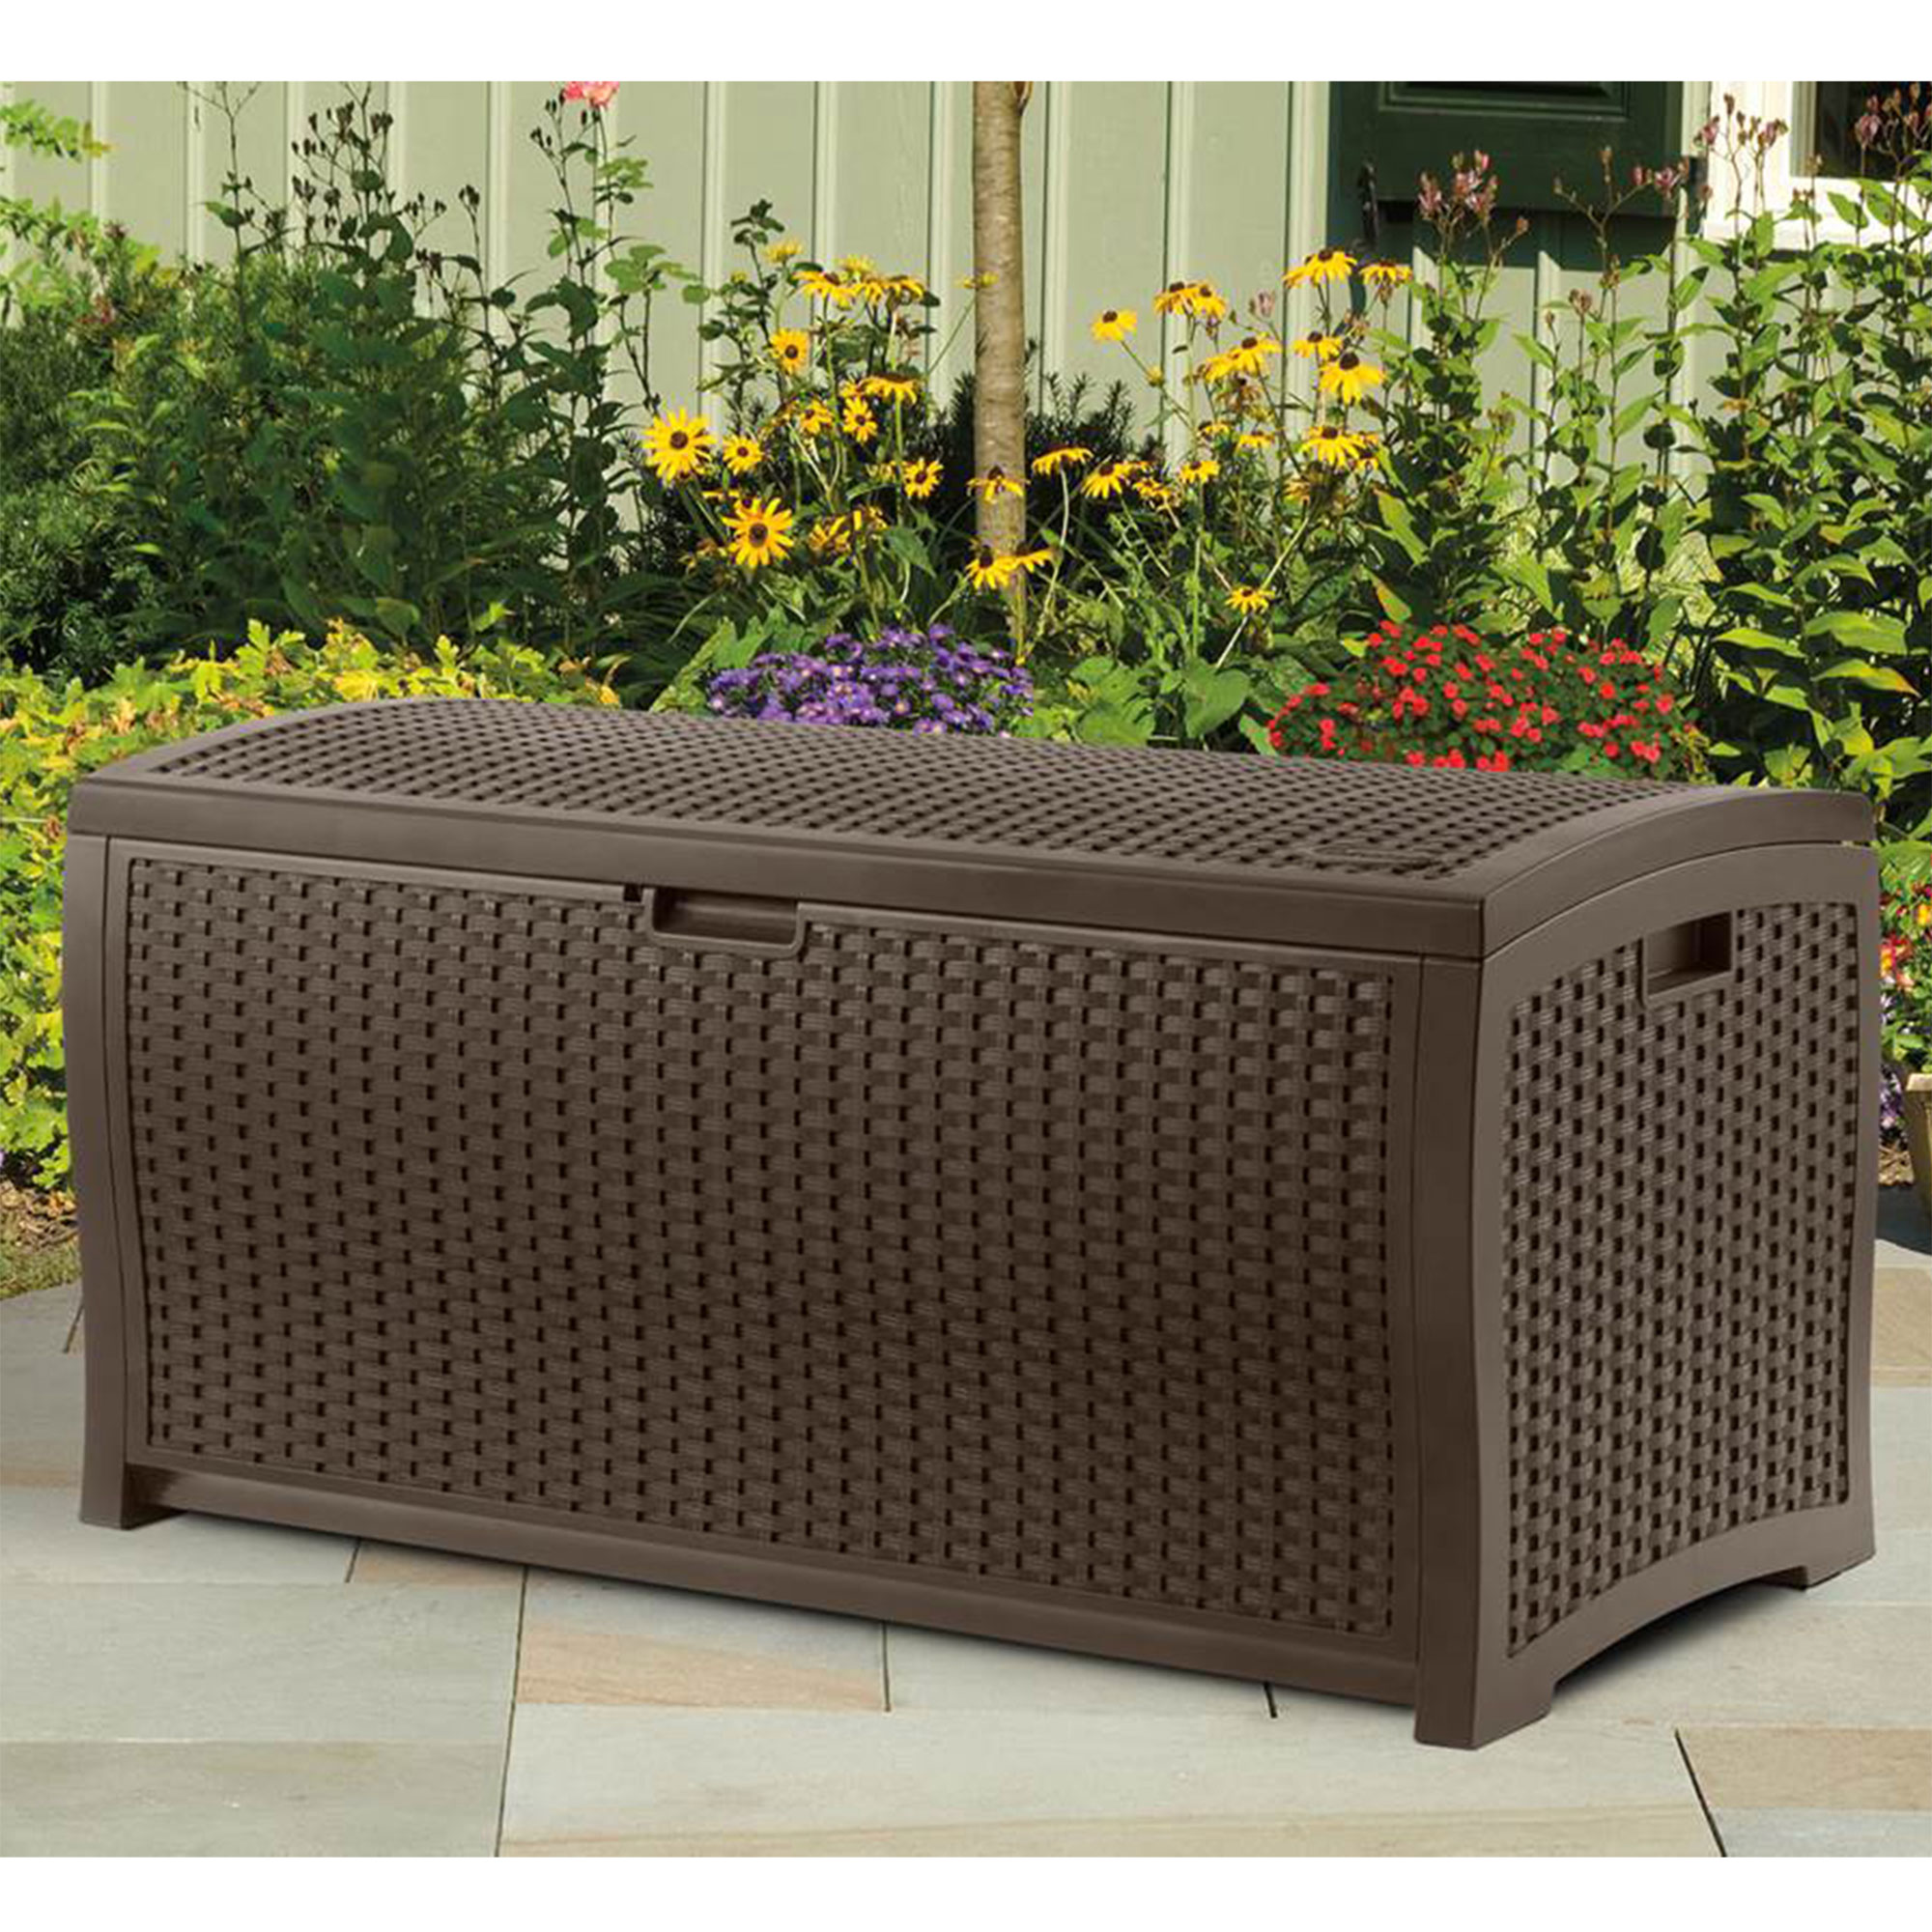 Suncast Indoor and Outdoor 73 Gallon Resin Deck Box with Seat, Mocha Brown, 46 in D x 22.5 in H x 21.6 in W - image 8 of 8